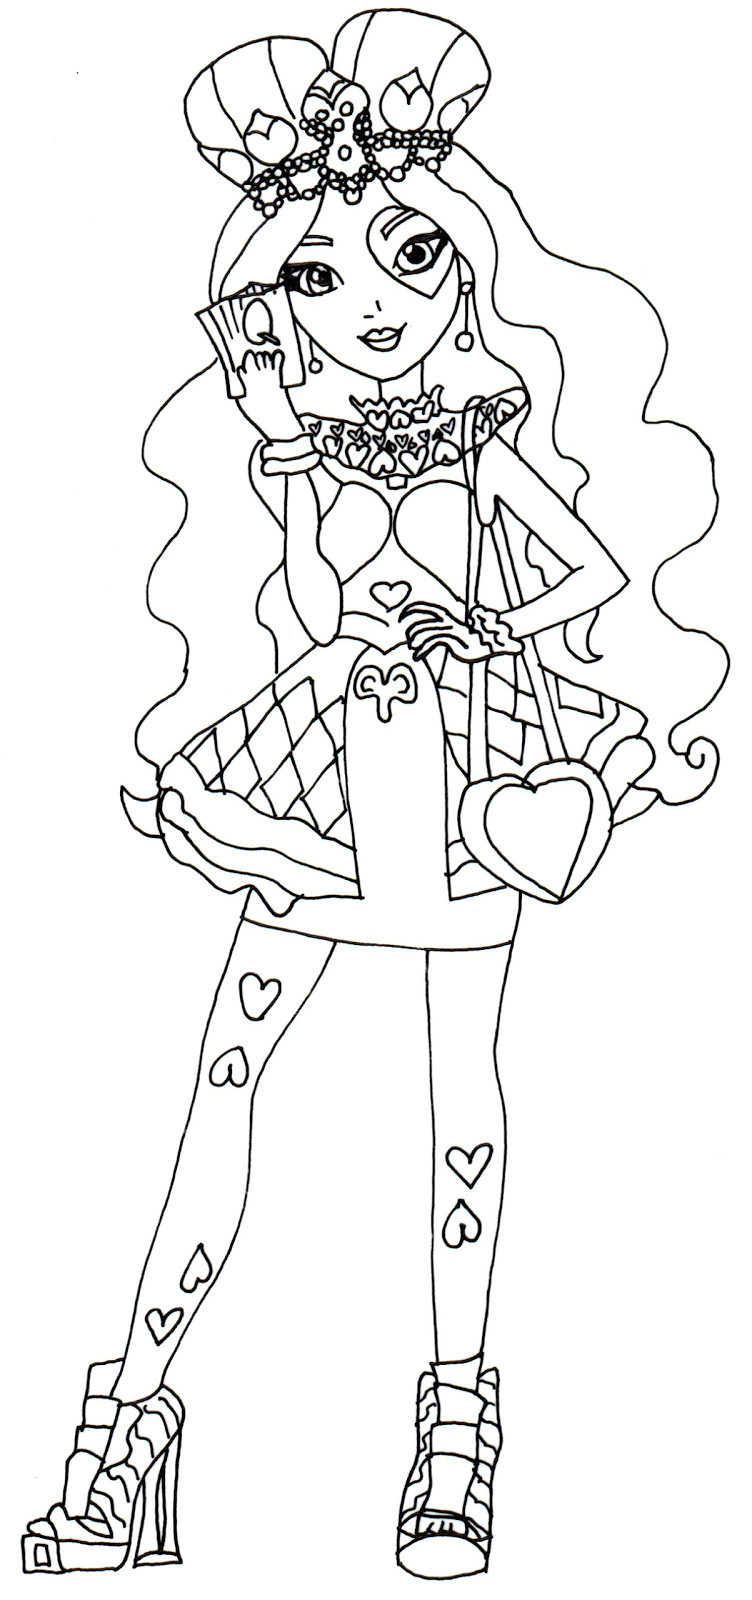 Lizzie Hearts Ever After High Coloring Page | Heart bei Ausmalbilder Ever After High